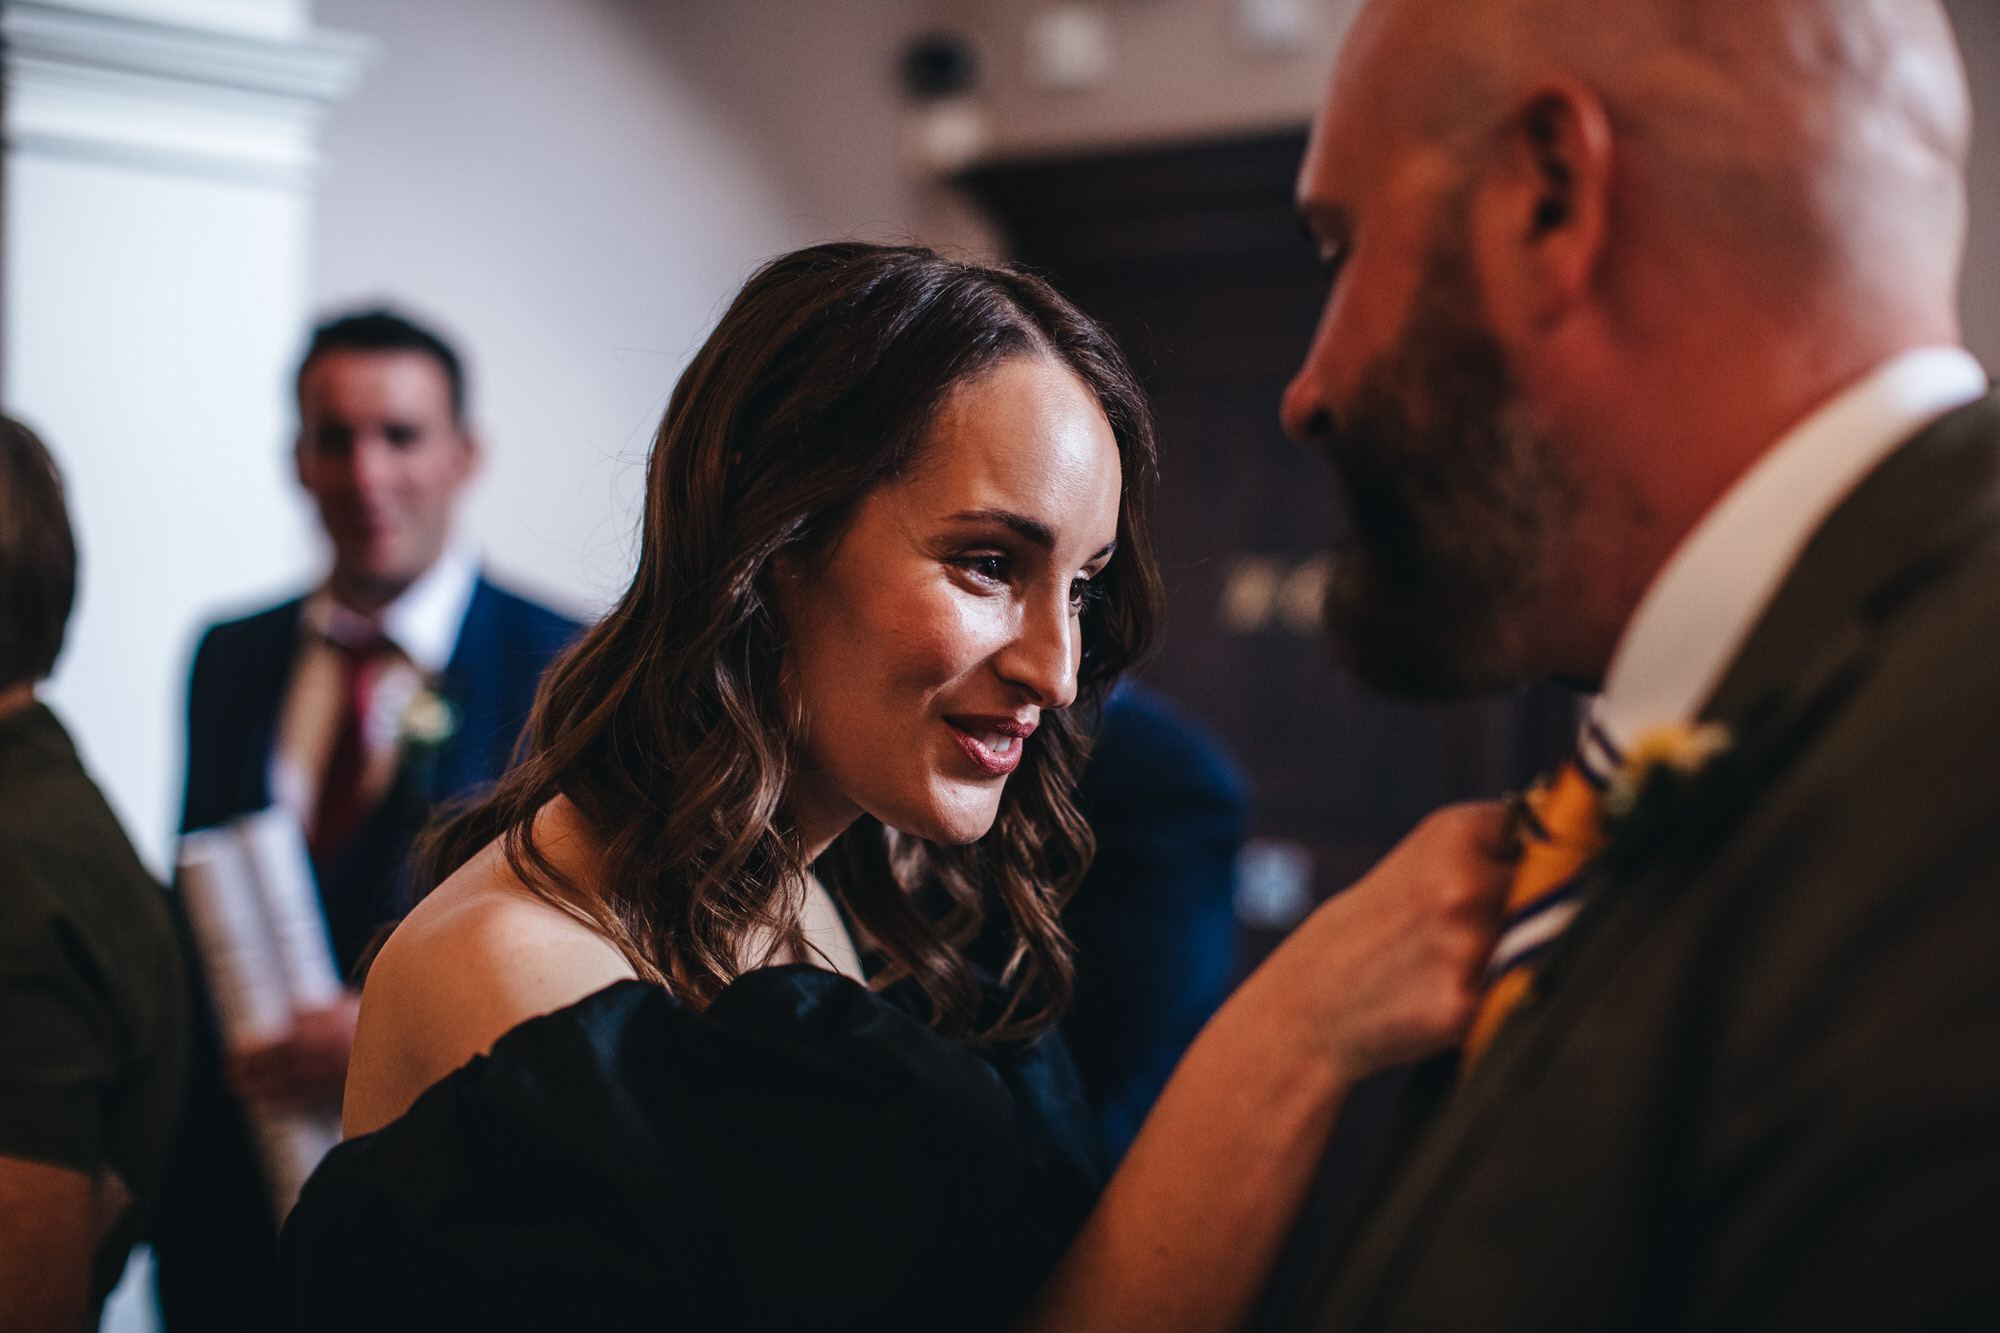 guest looks closely at groom's suit lapel